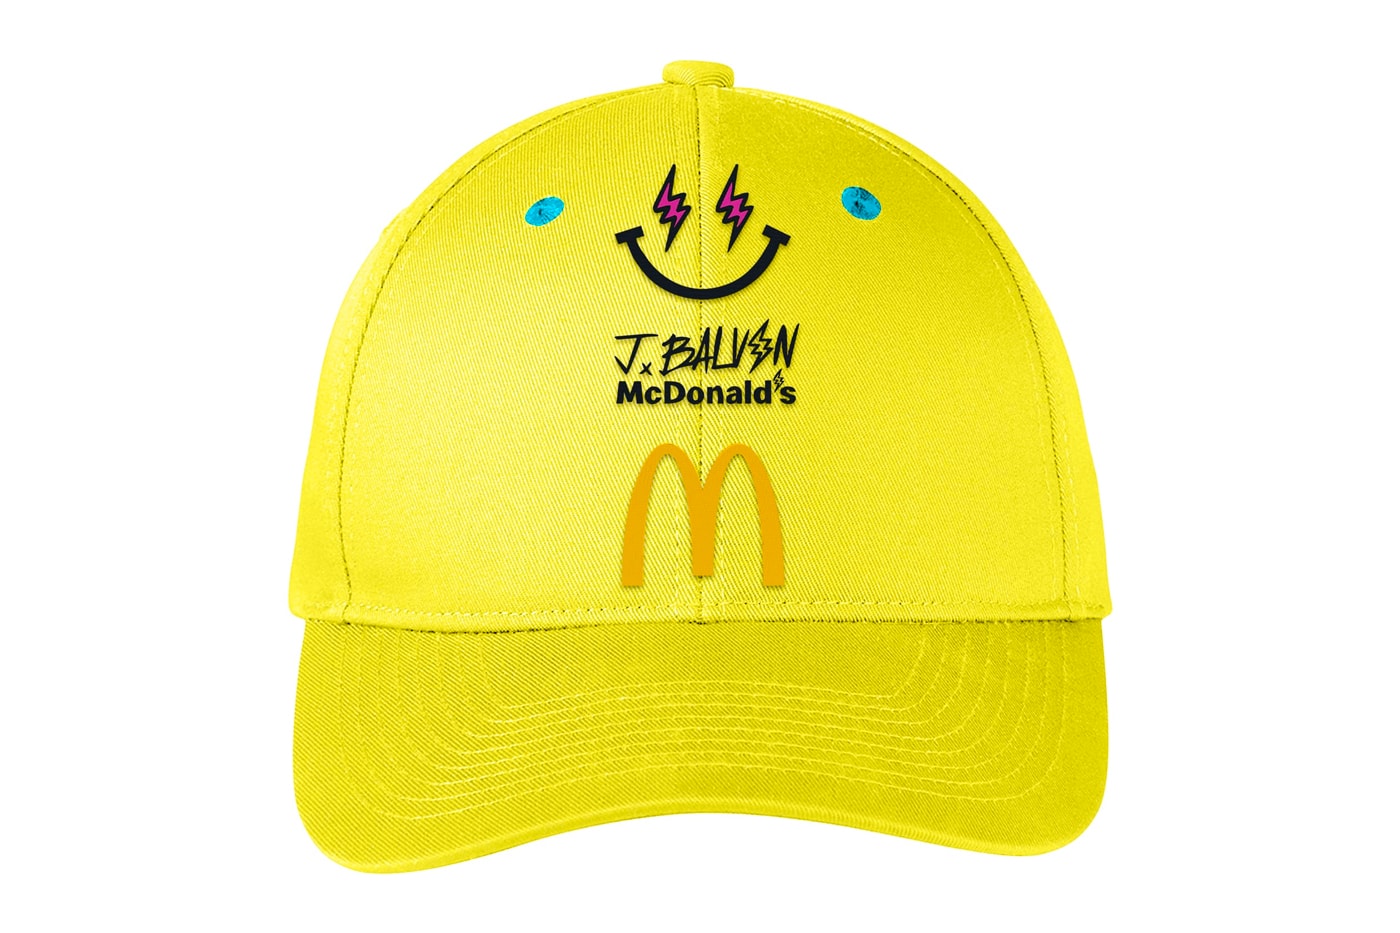 J Balvin launches colourful capsule collection with fashion brand